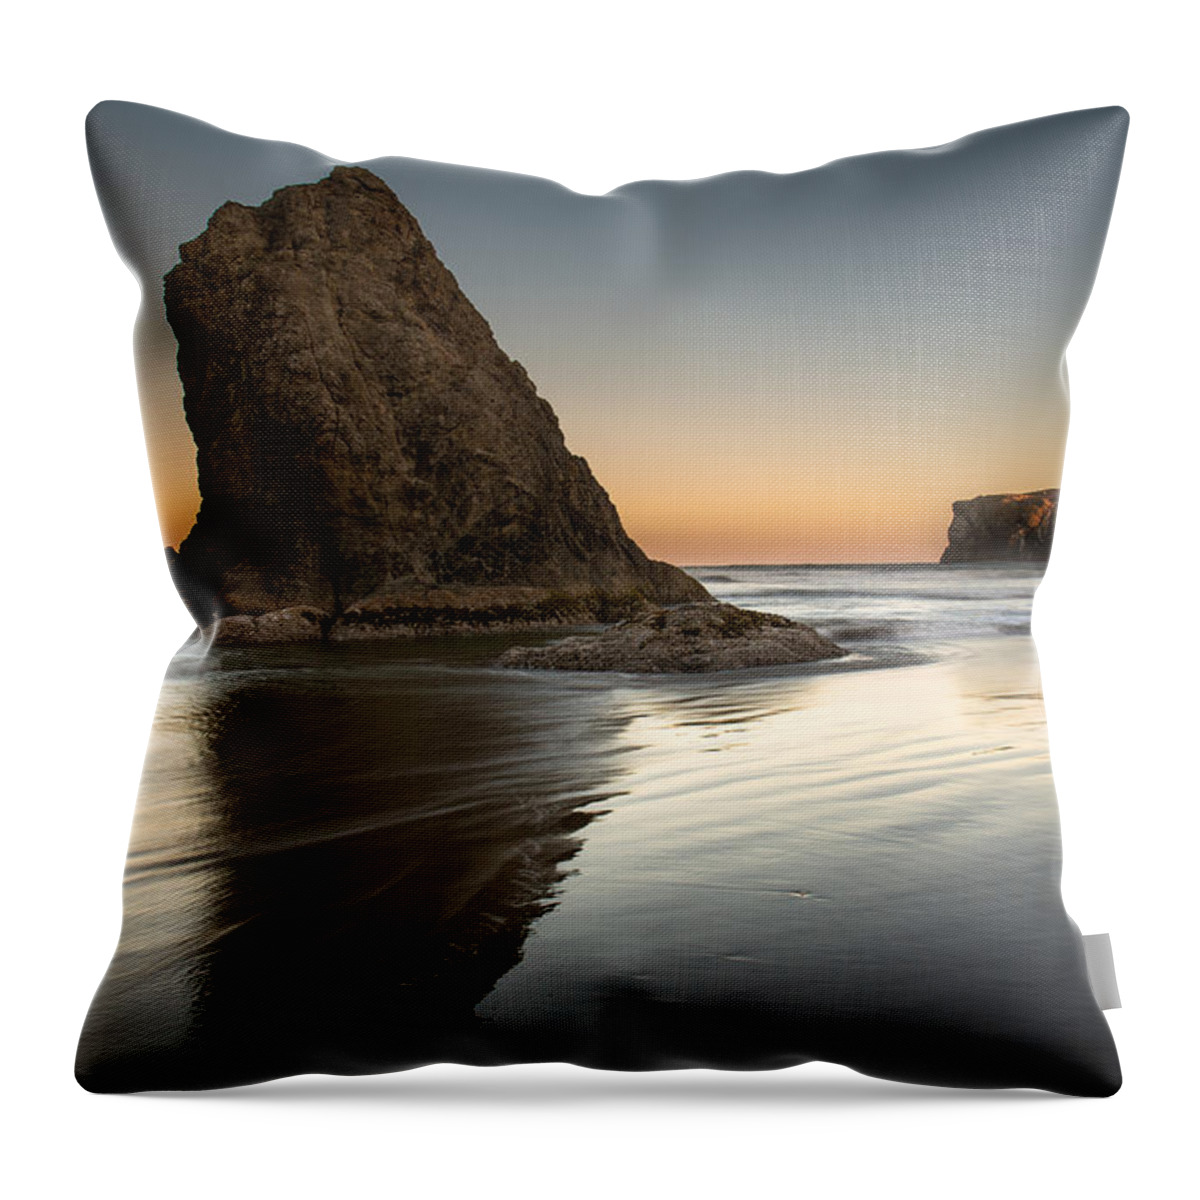 Bandon Throw Pillow featuring the photograph Last Day at Bandon by Tim Bryan